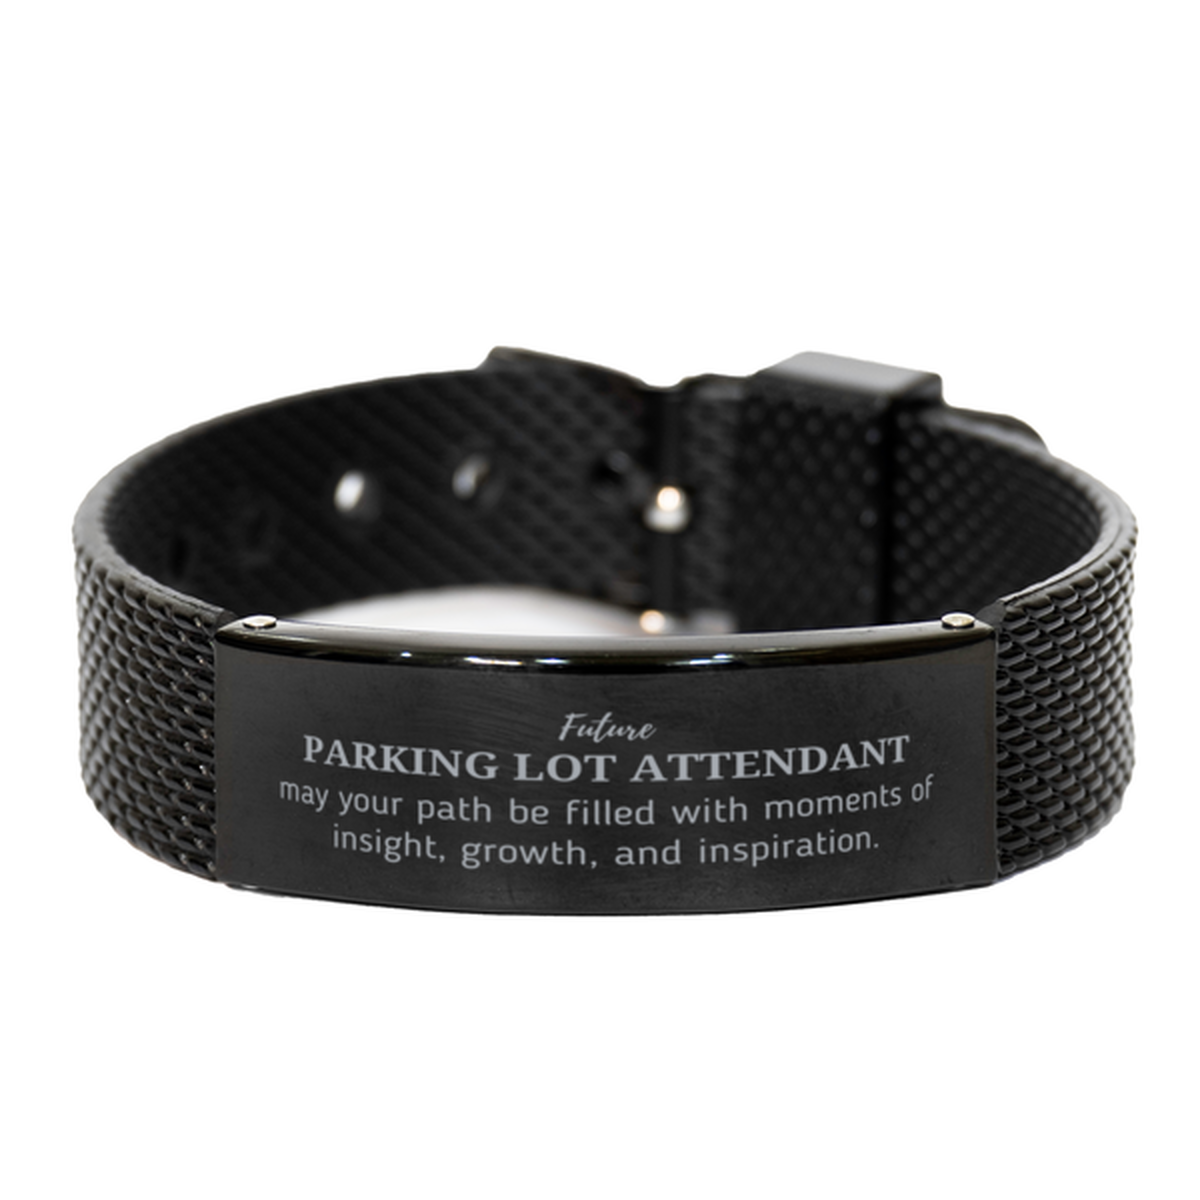 Future Parking Lot Attendant Gifts, May your path be filled with moments of insight, Graduation Gifts for New Parking Lot Attendant, Christmas Unique Black Shark Mesh Bracelet For Men, Women, Friends